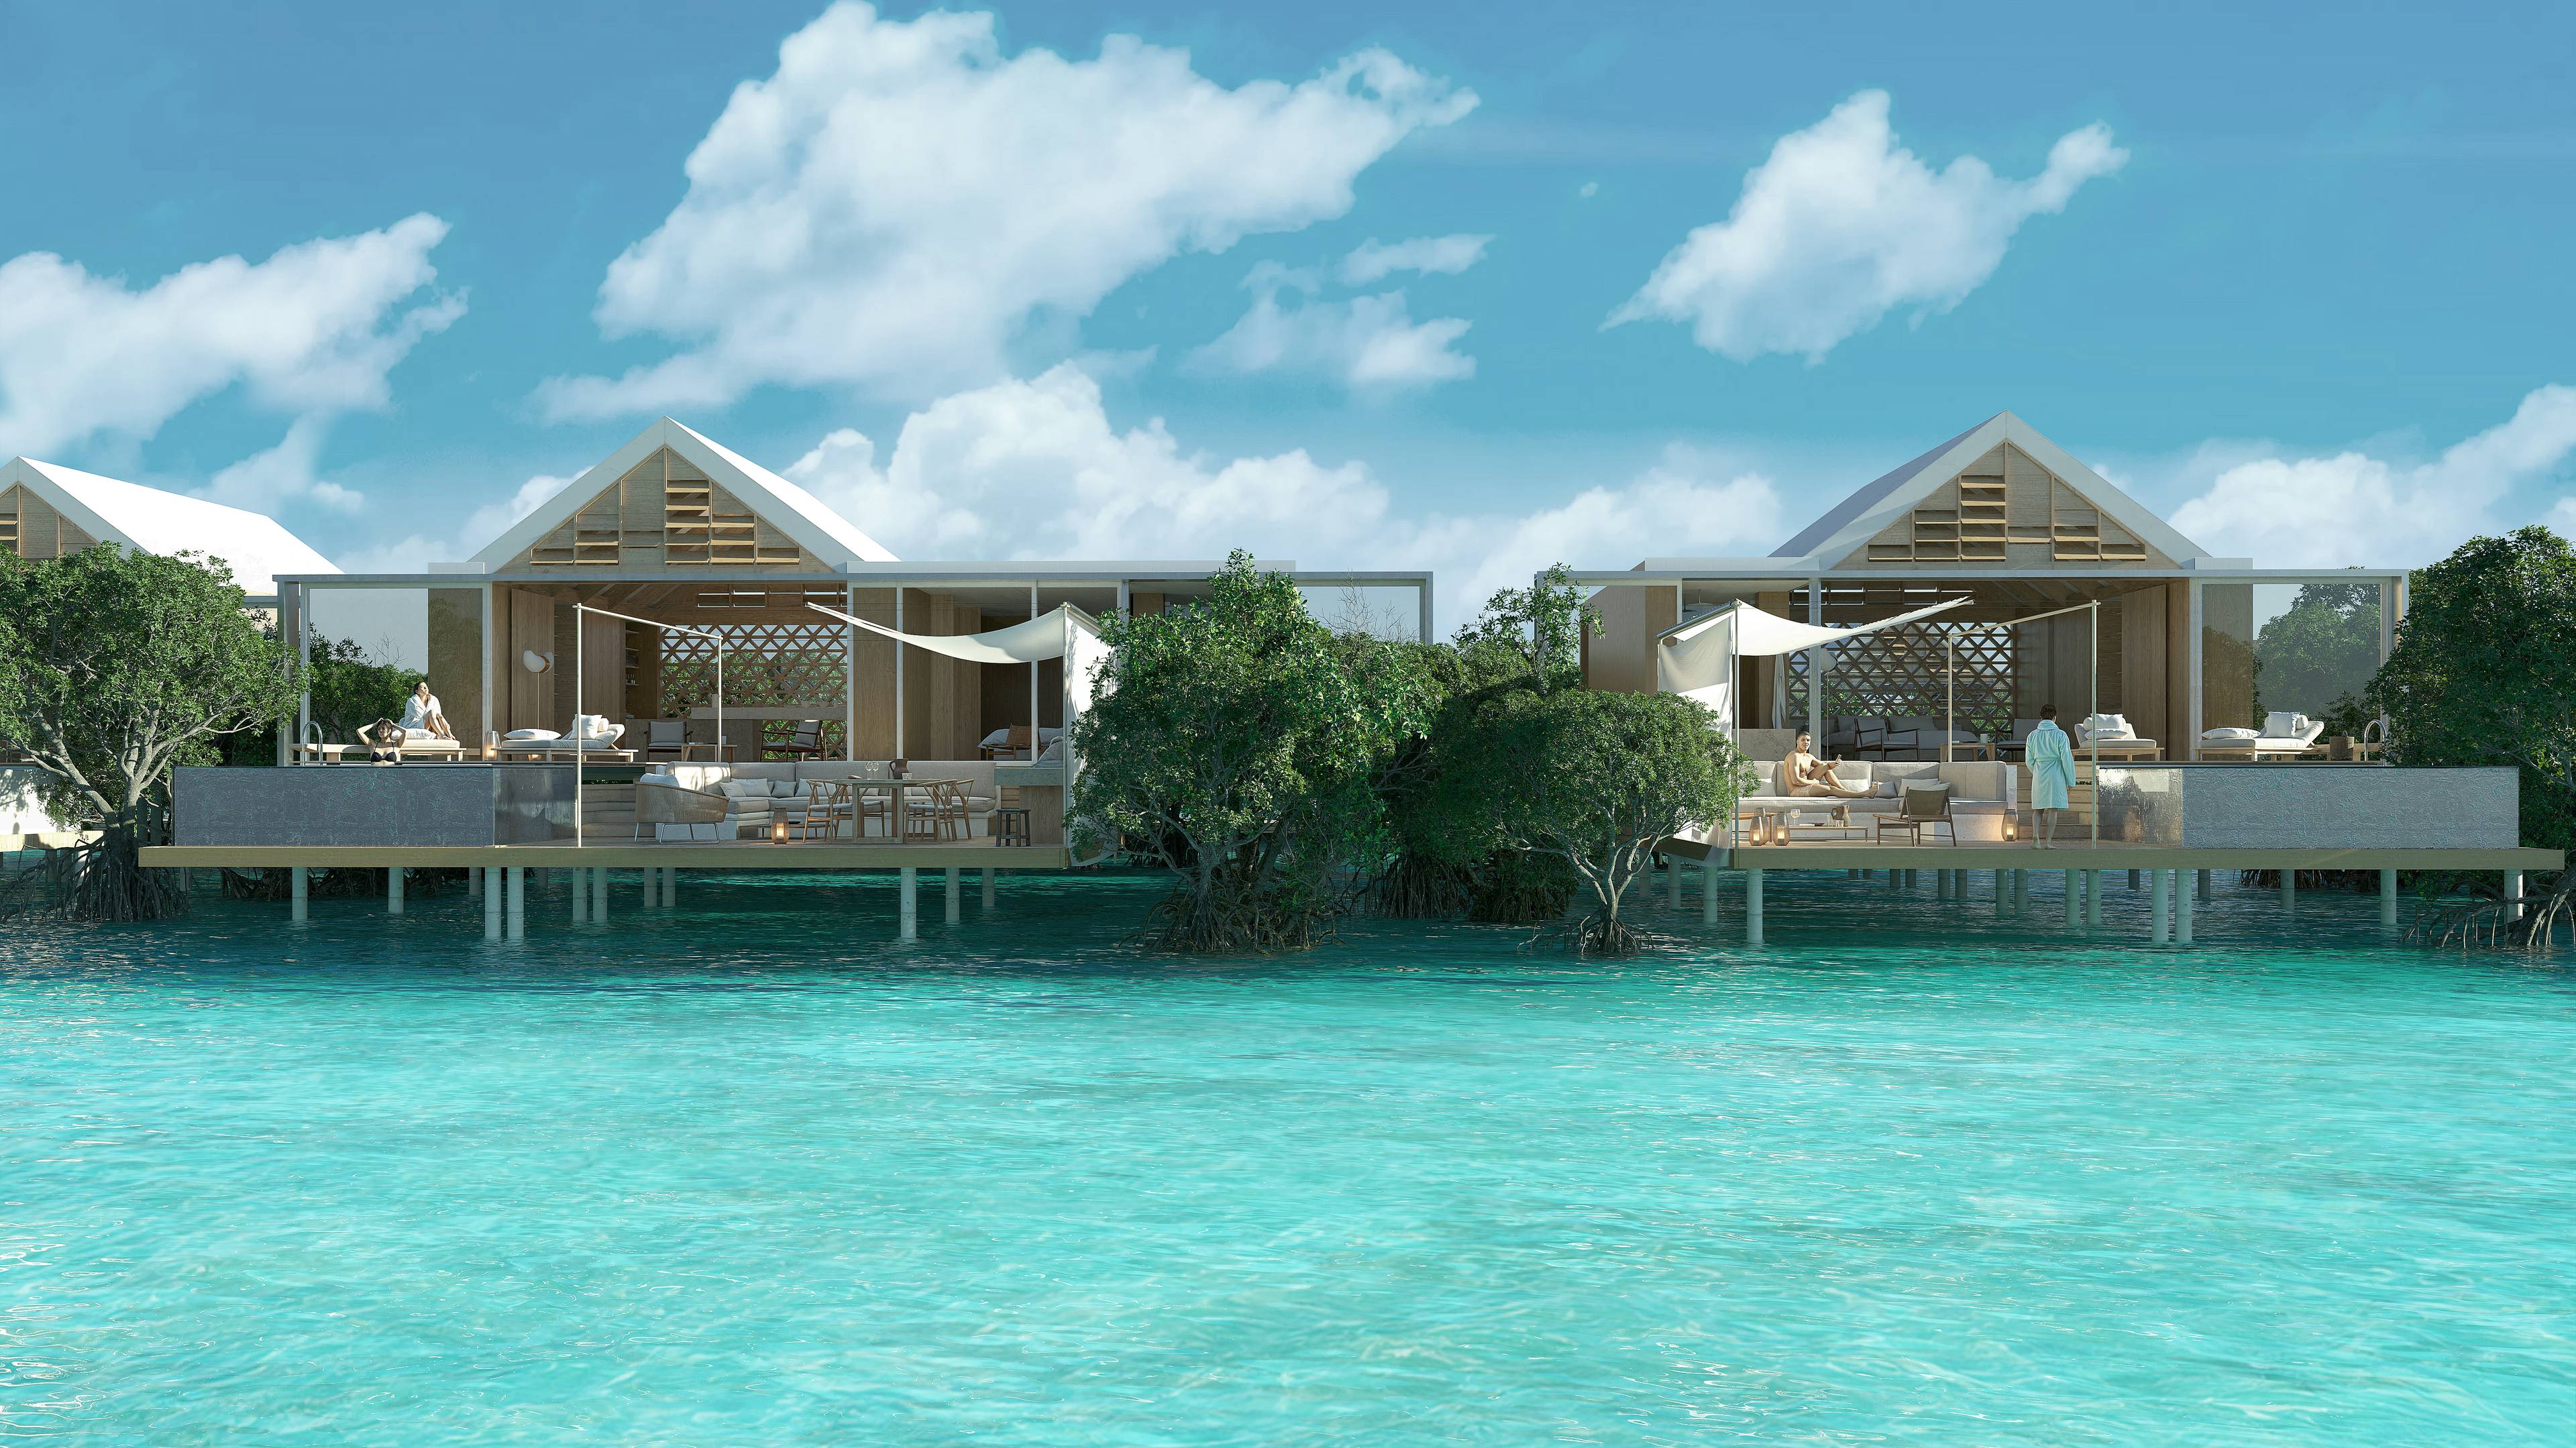 PREMIUM ONE BEDROOM VILLA on first dedicated 5-Star Residence Resort in the Maldives.